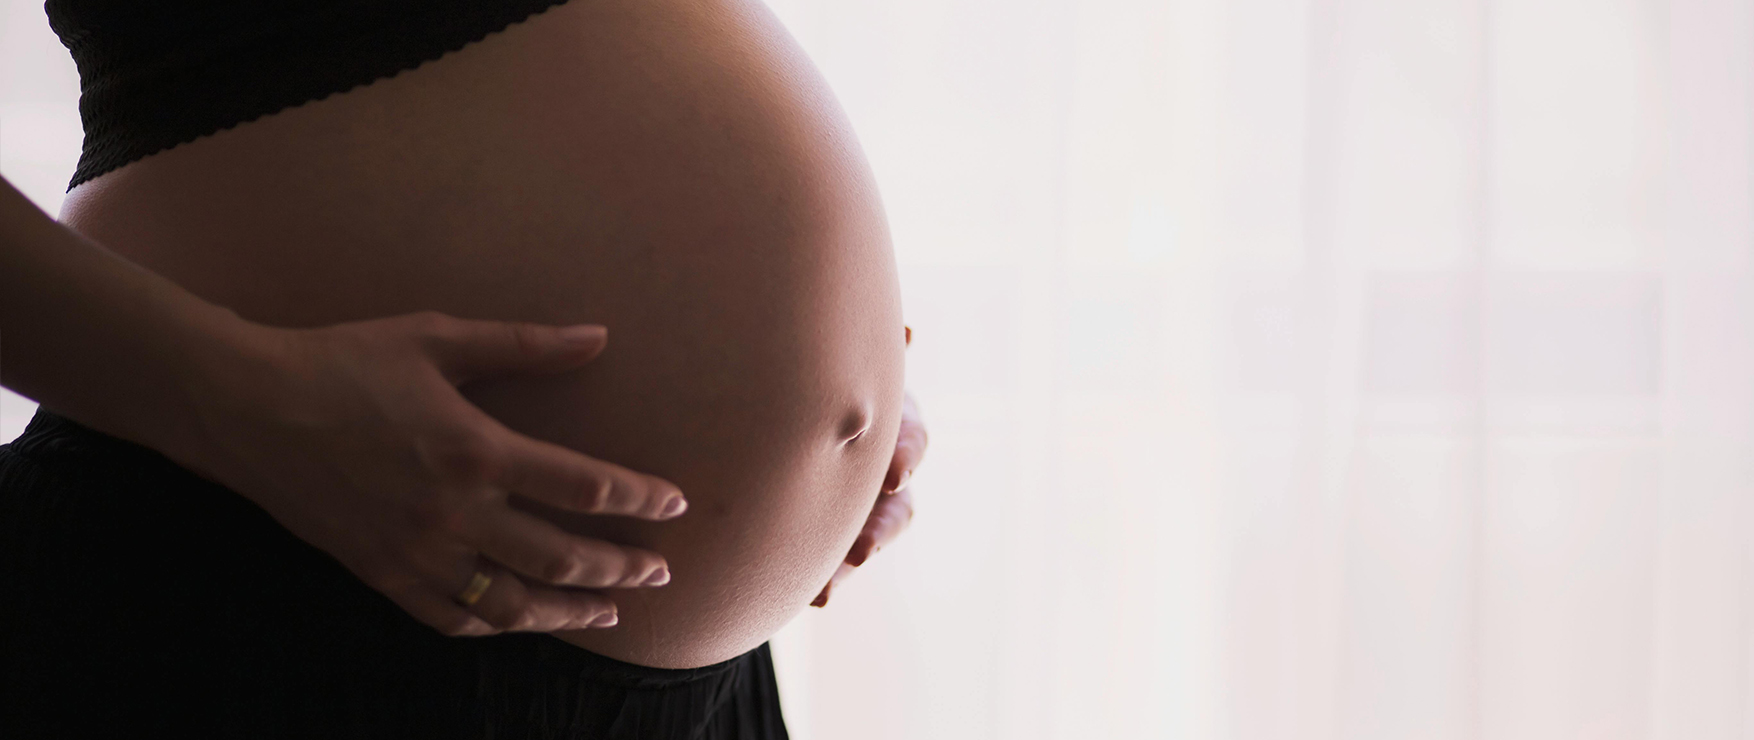 An image of a pregnant person's belly in front of a window with a sheer white curtain. This image is used as an introductory image for Solgar's blog, "8 Nutrients You Should Take During Pregnancy".